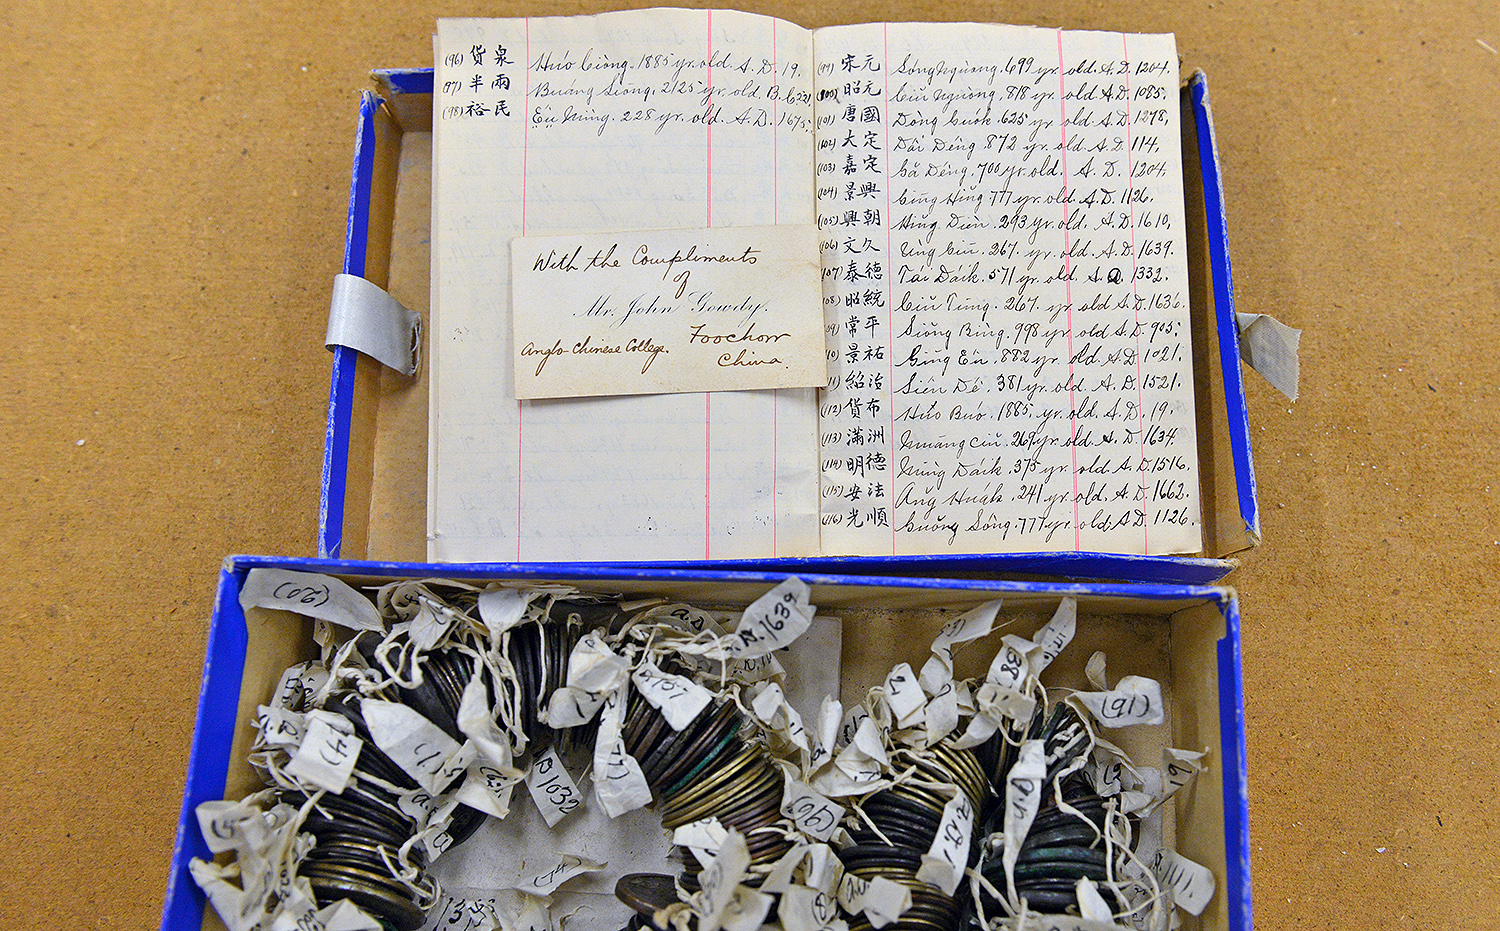 While rummaging through drawers in Exley's Specimen Storage room, Ellen Thomas discovered large collections of old coins including miniature intaglios and ancient Chinese coins collected by the Methodist missionaries who started Wesleyan. The coins are documented in an accompanying booklet. 